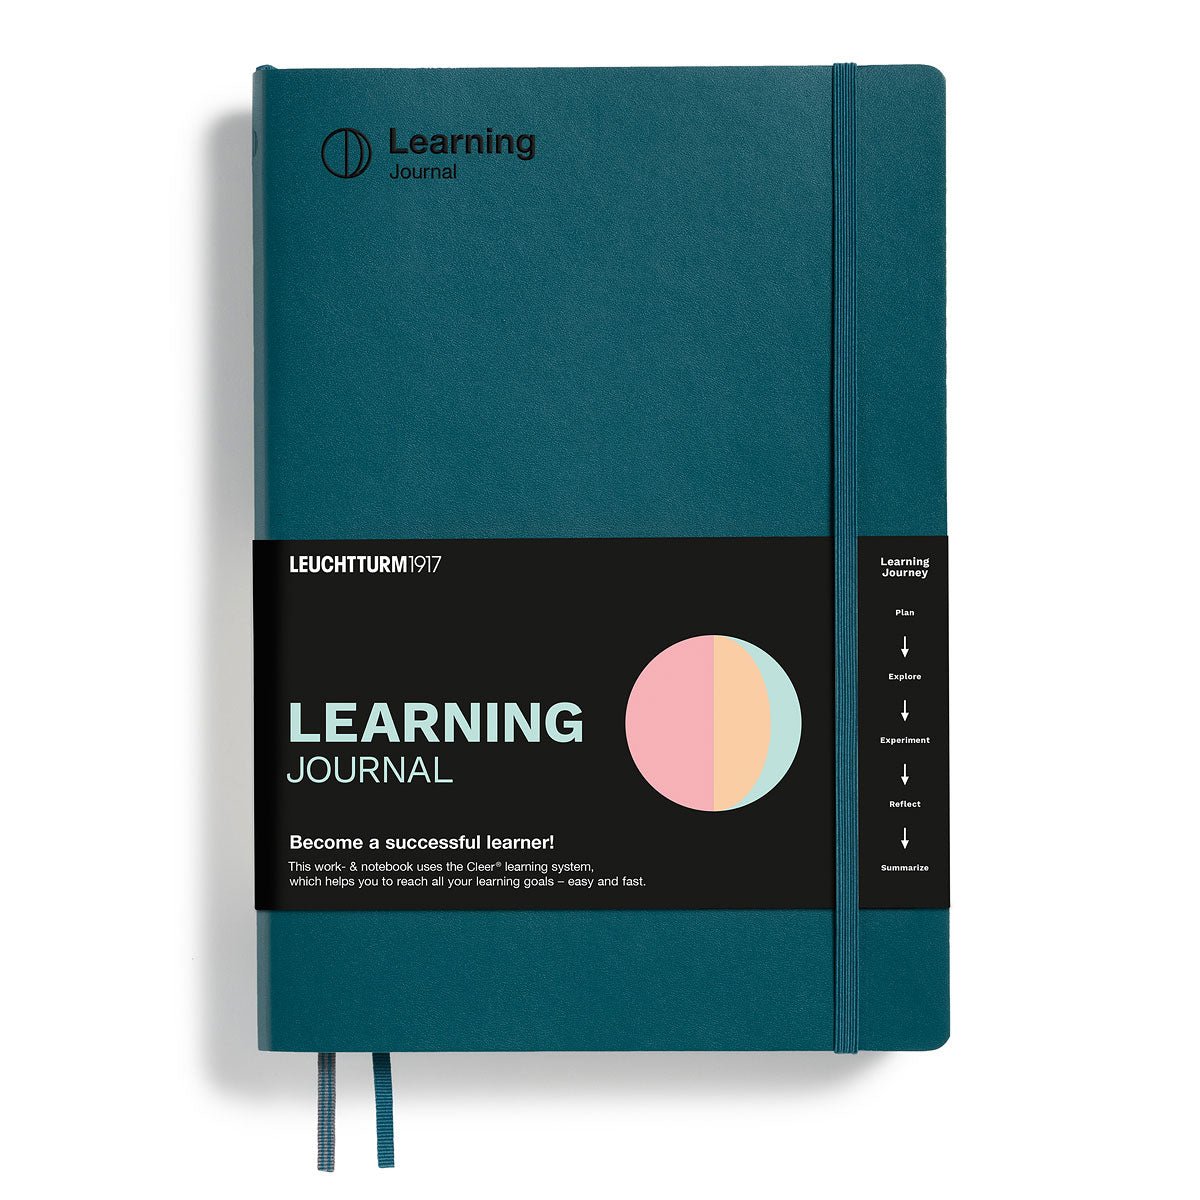 Learning Journal - Cleer learning system - Pacific - Leuchtturm1917 - Tidformera